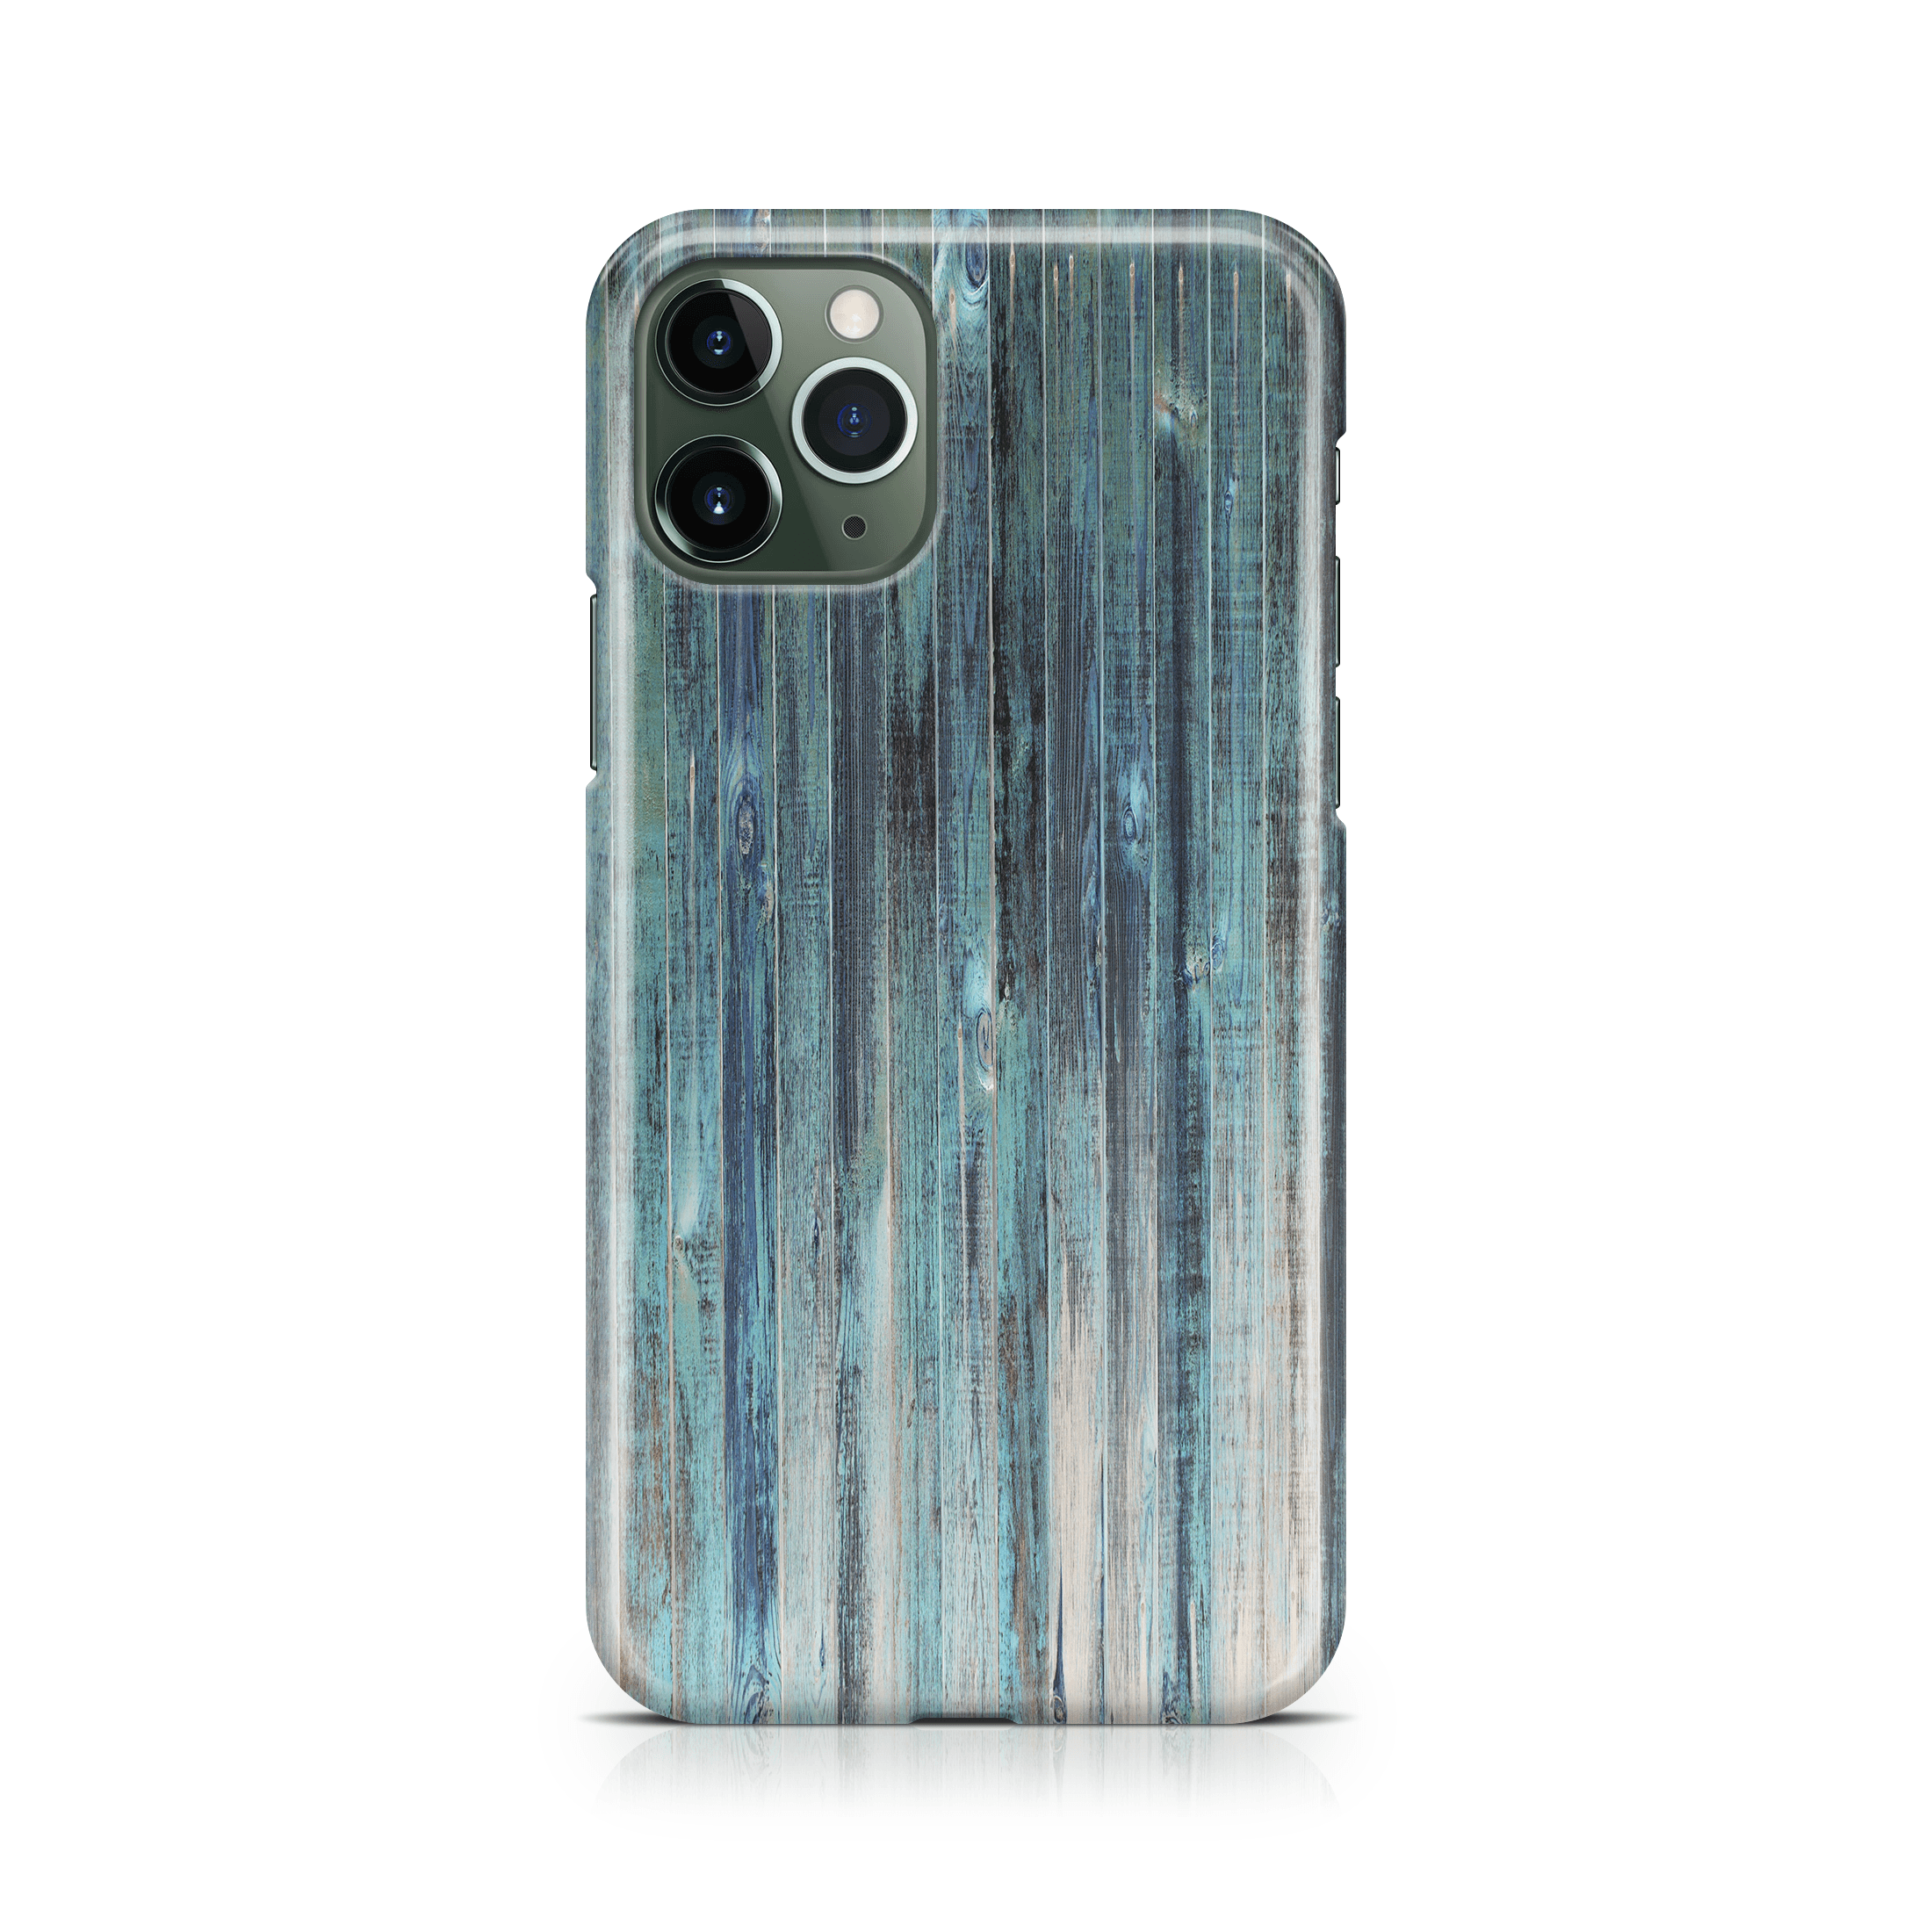 Blue Vintage Boards - iPhone phone case designs by CaseSwagger